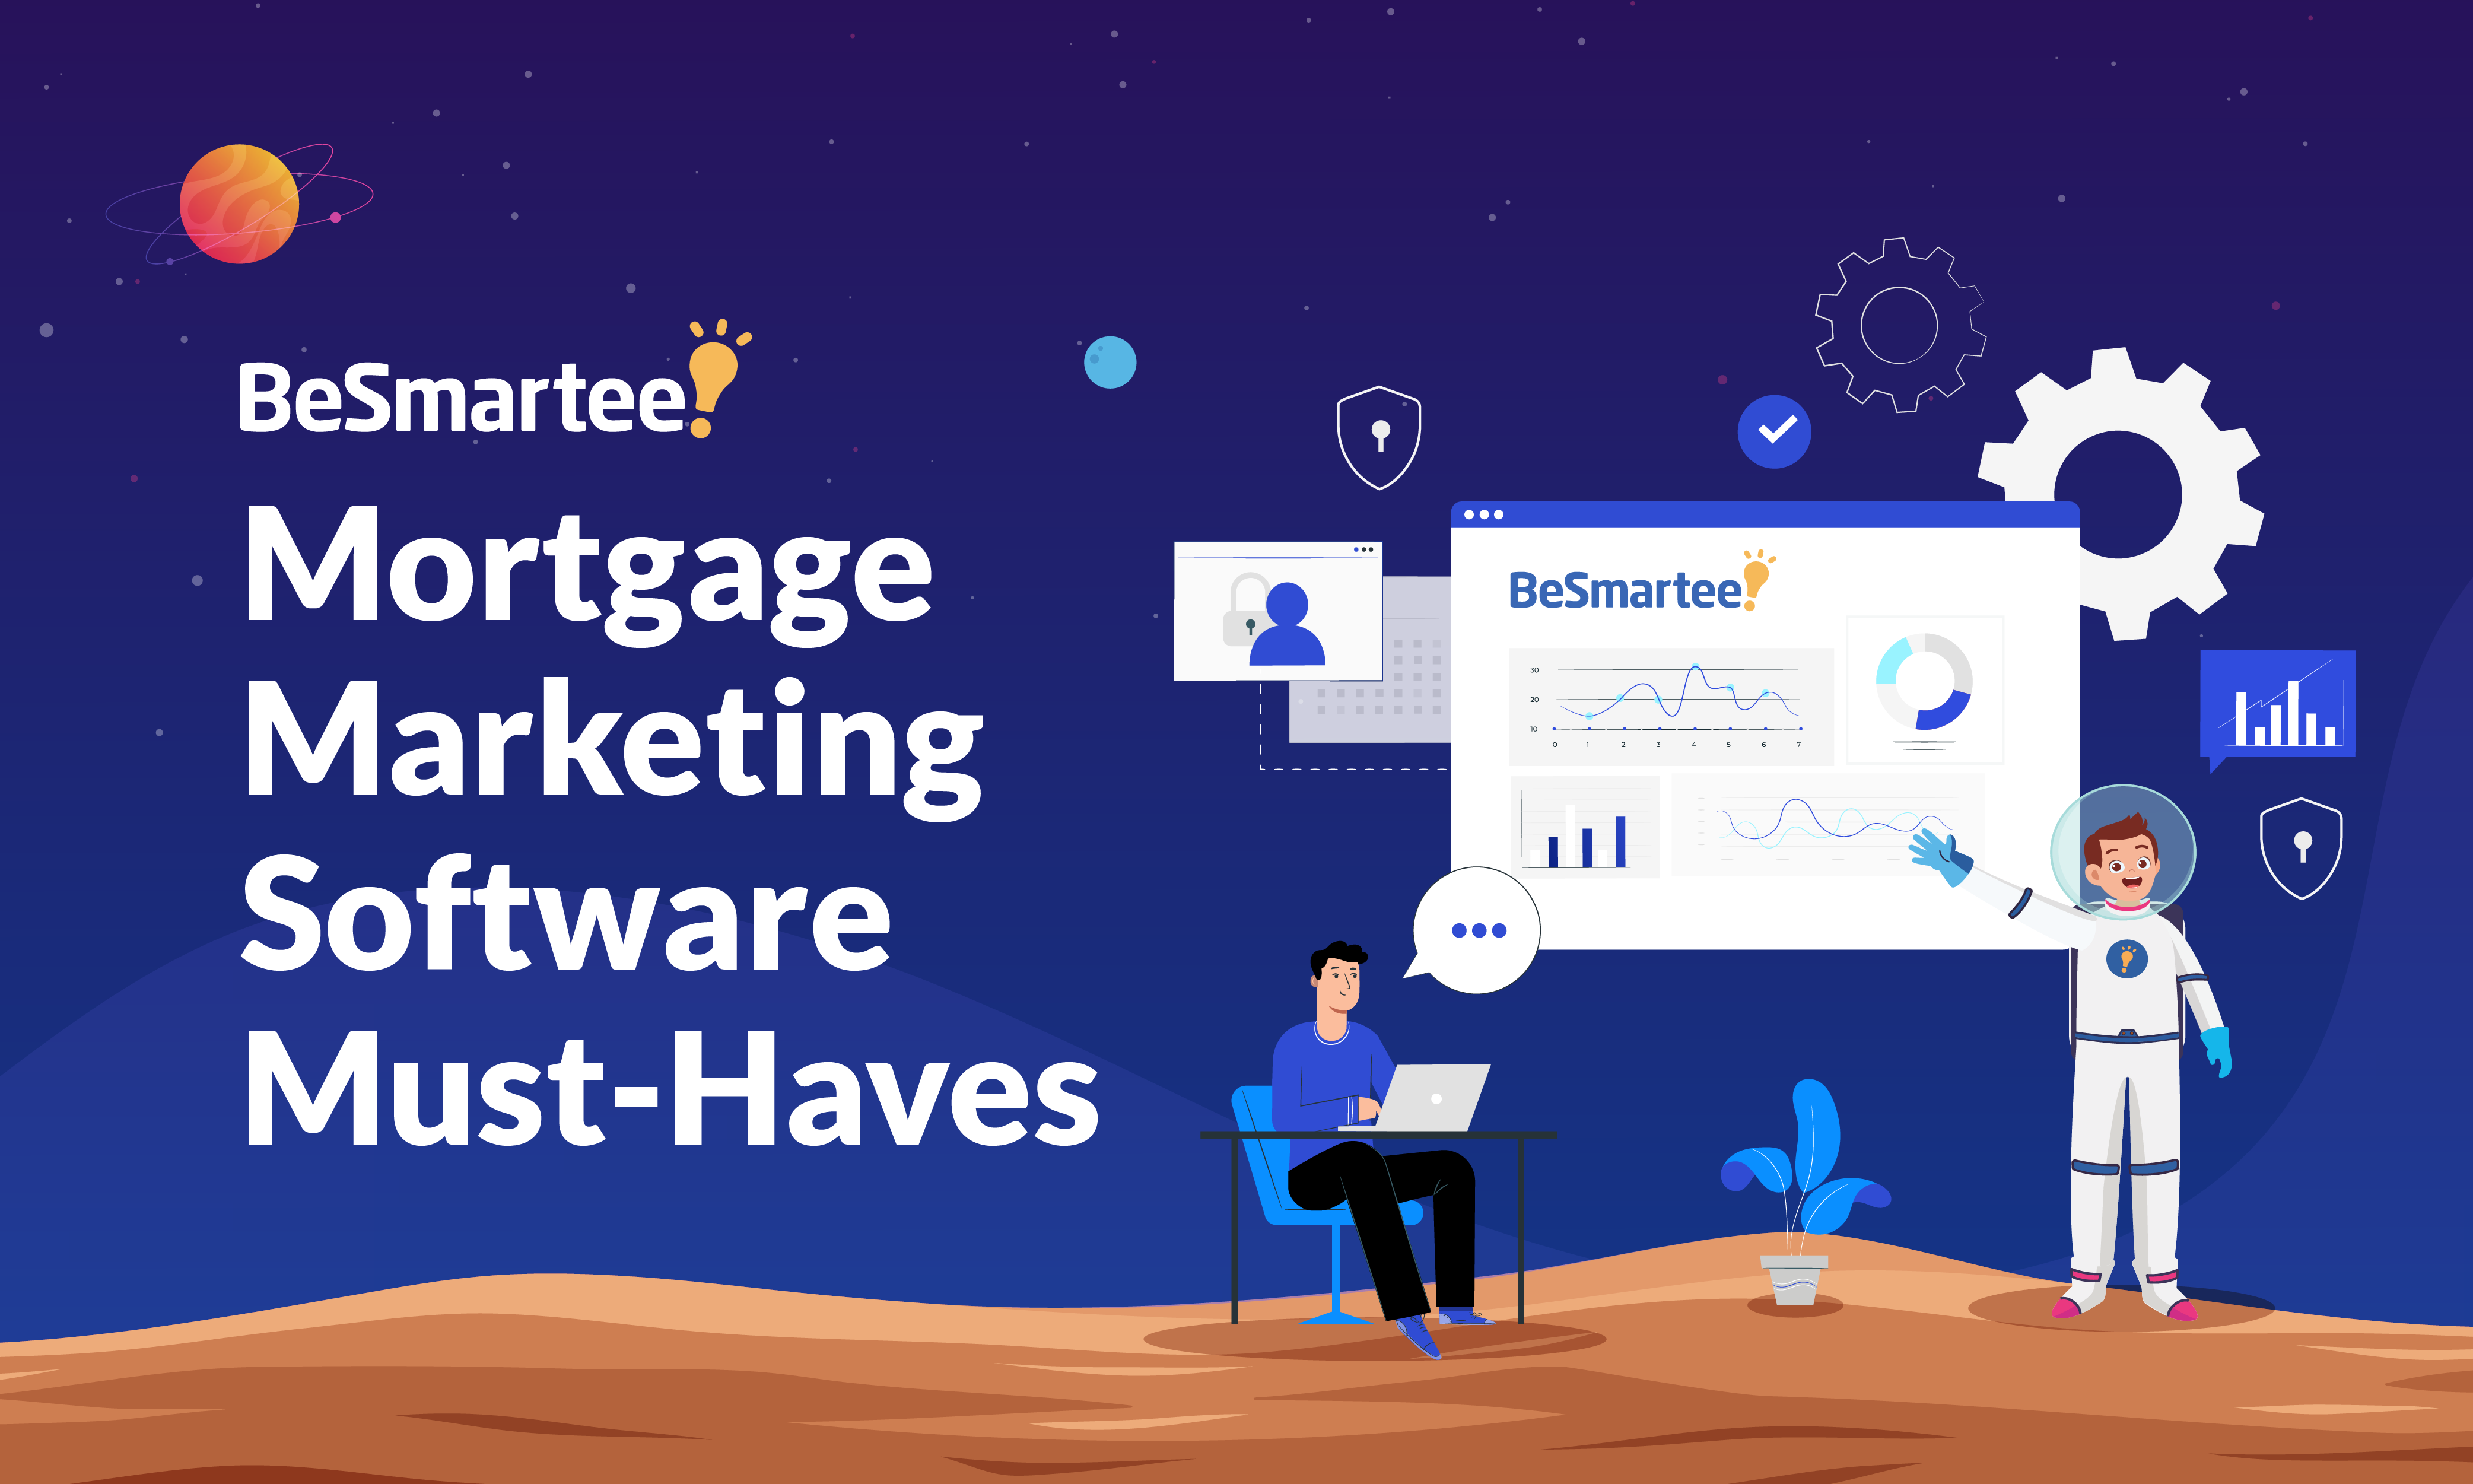 Mortgage Marketing Software Must-Haves